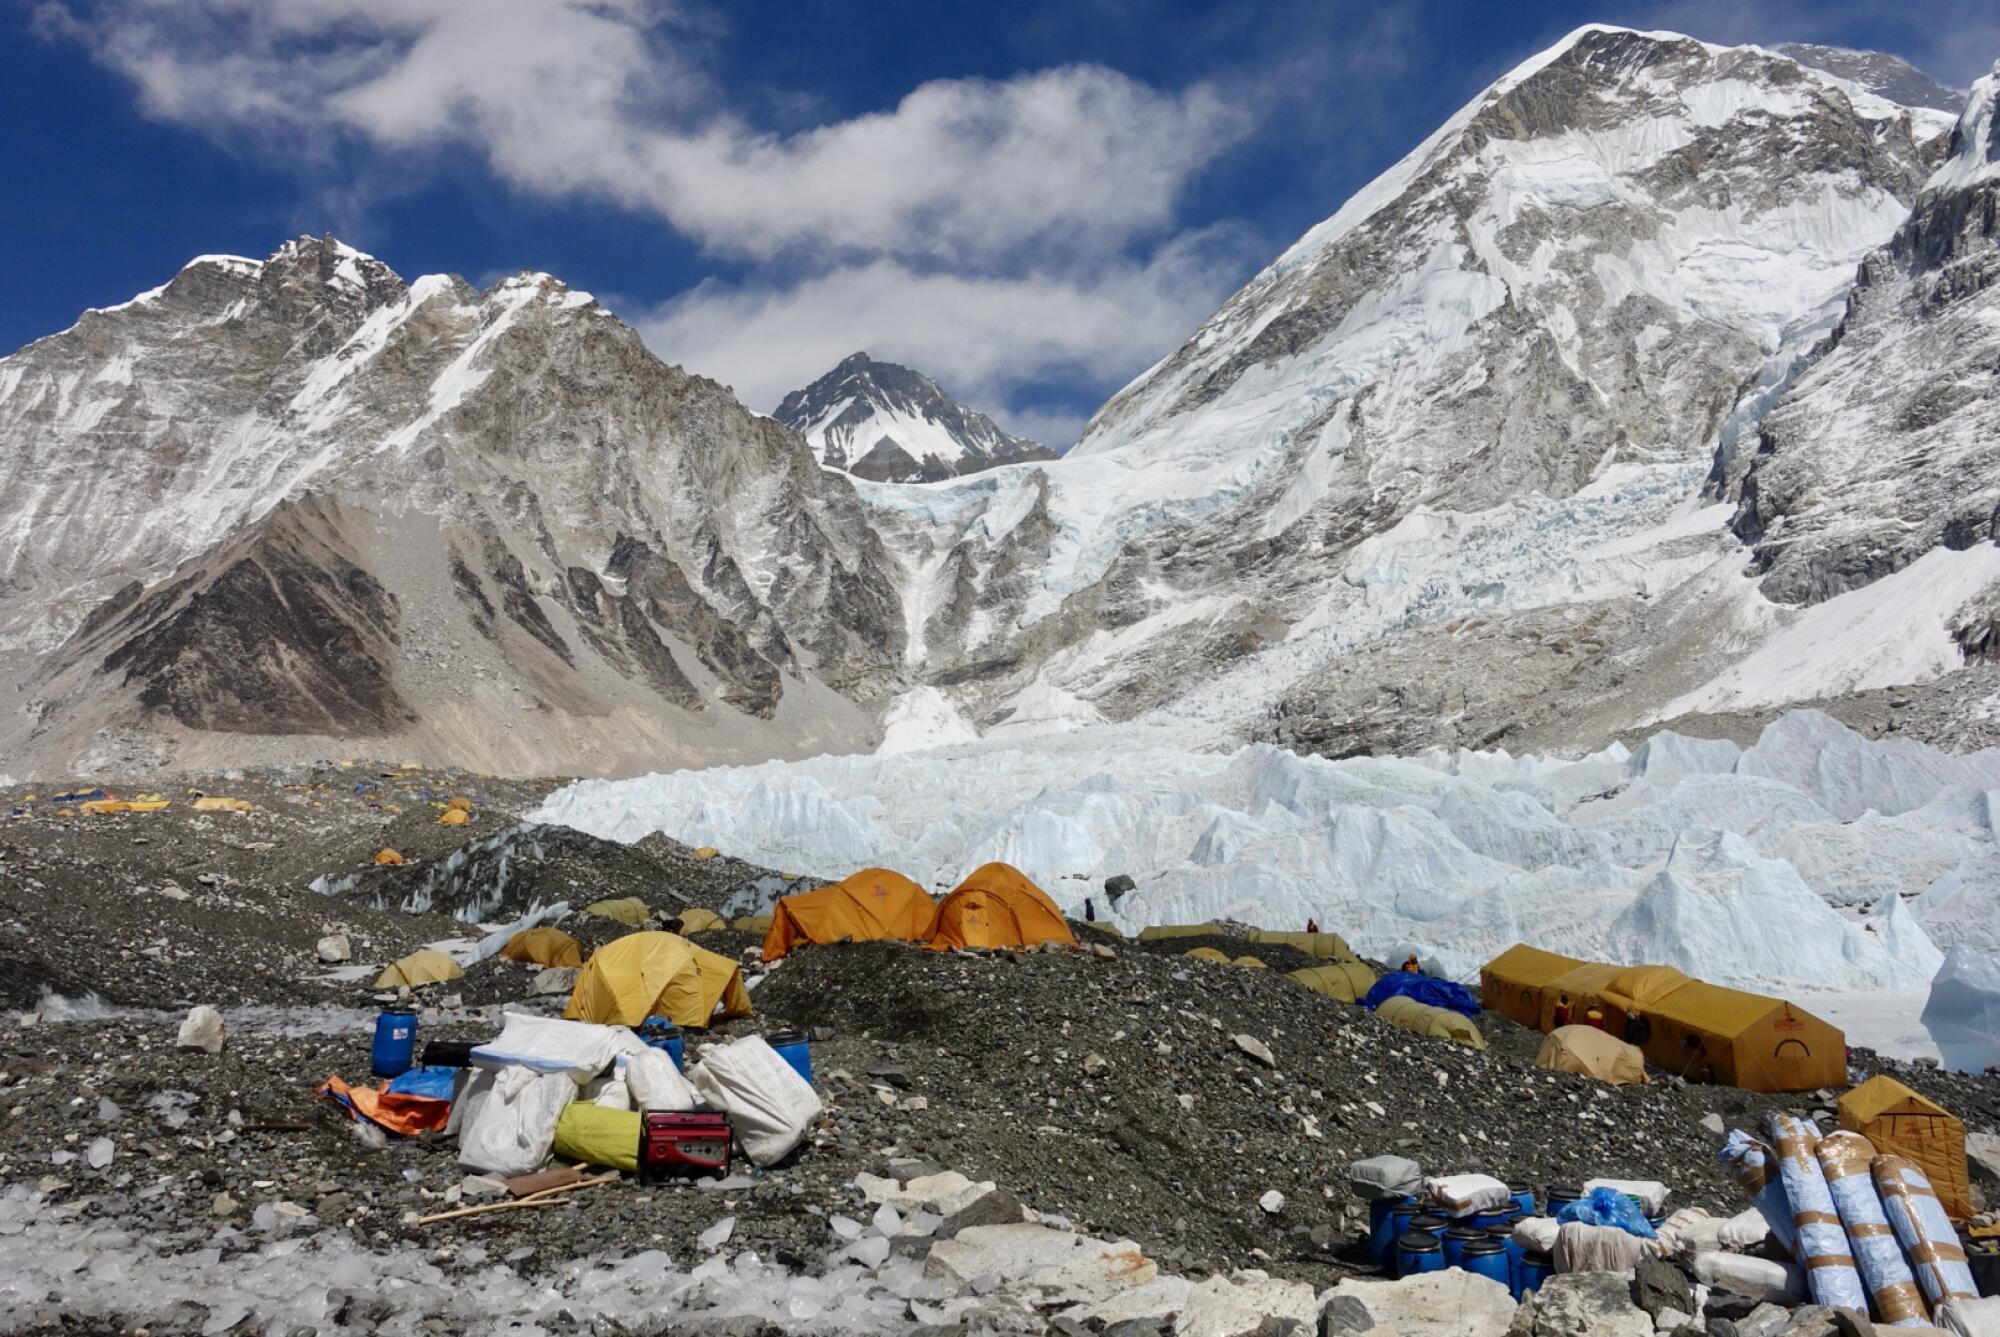 A collection of tents and mountaineering equipment in the icy Himalayas